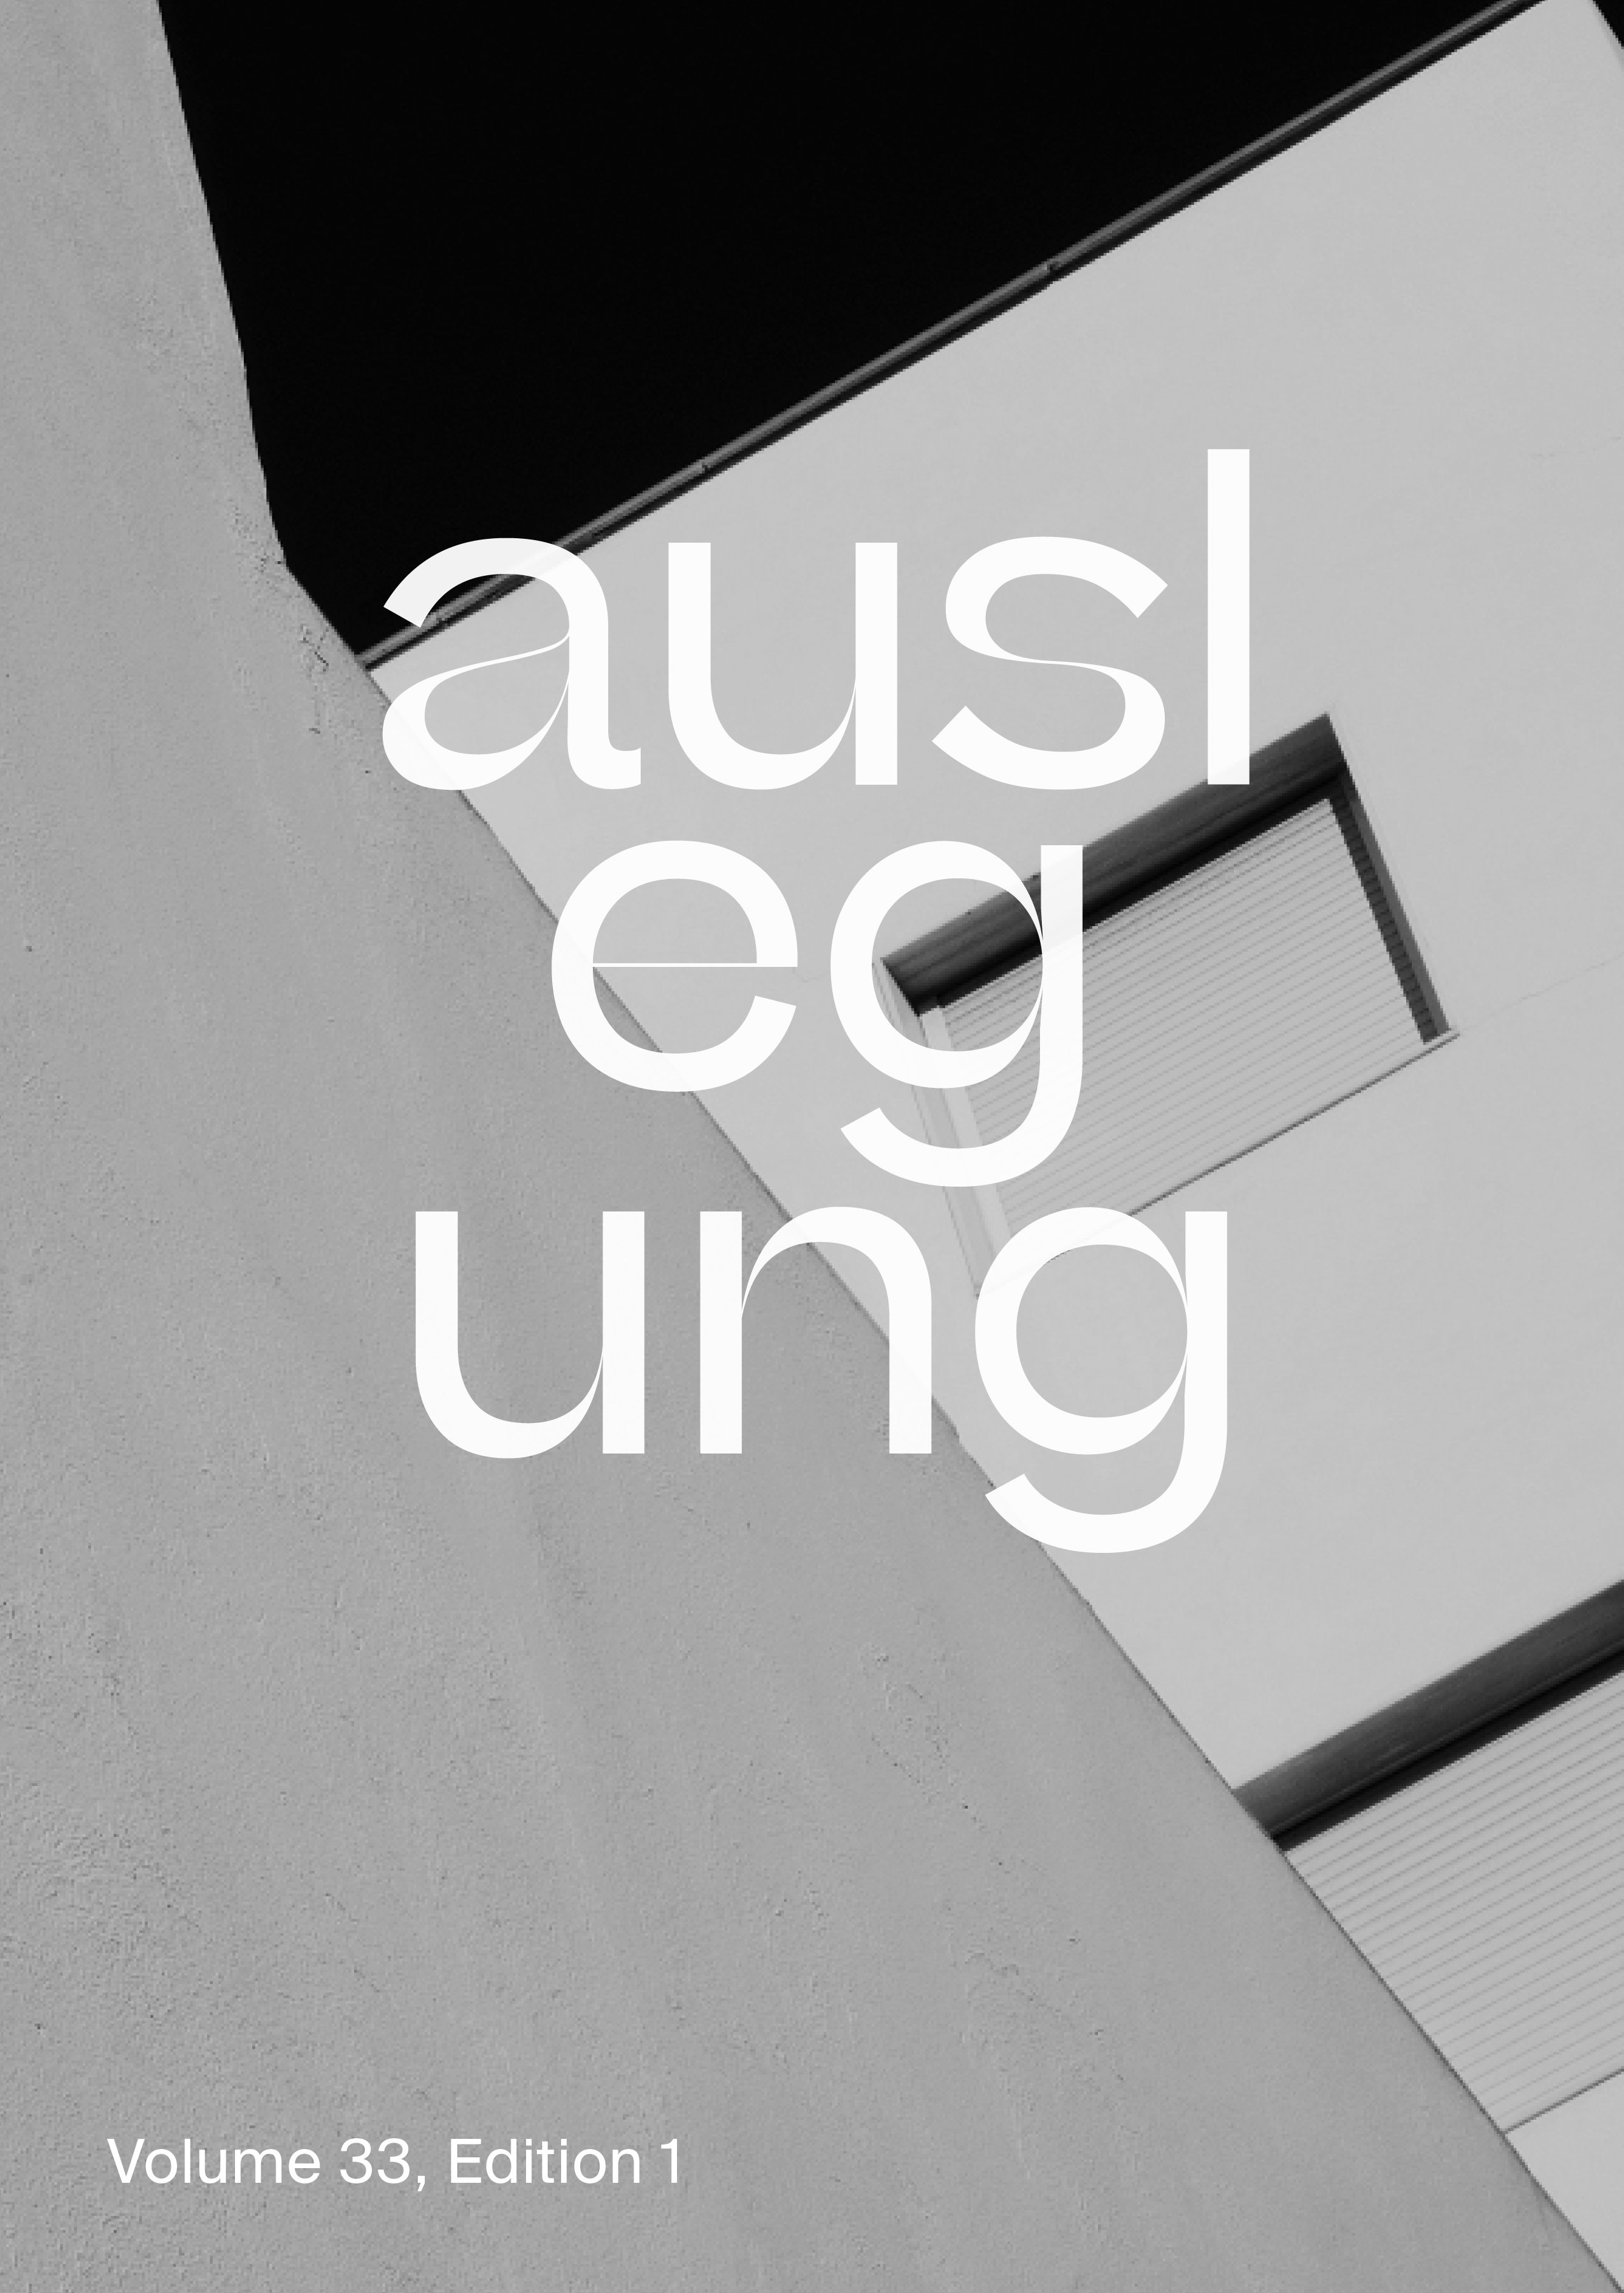 Cover of issue with "auslegung" written on it